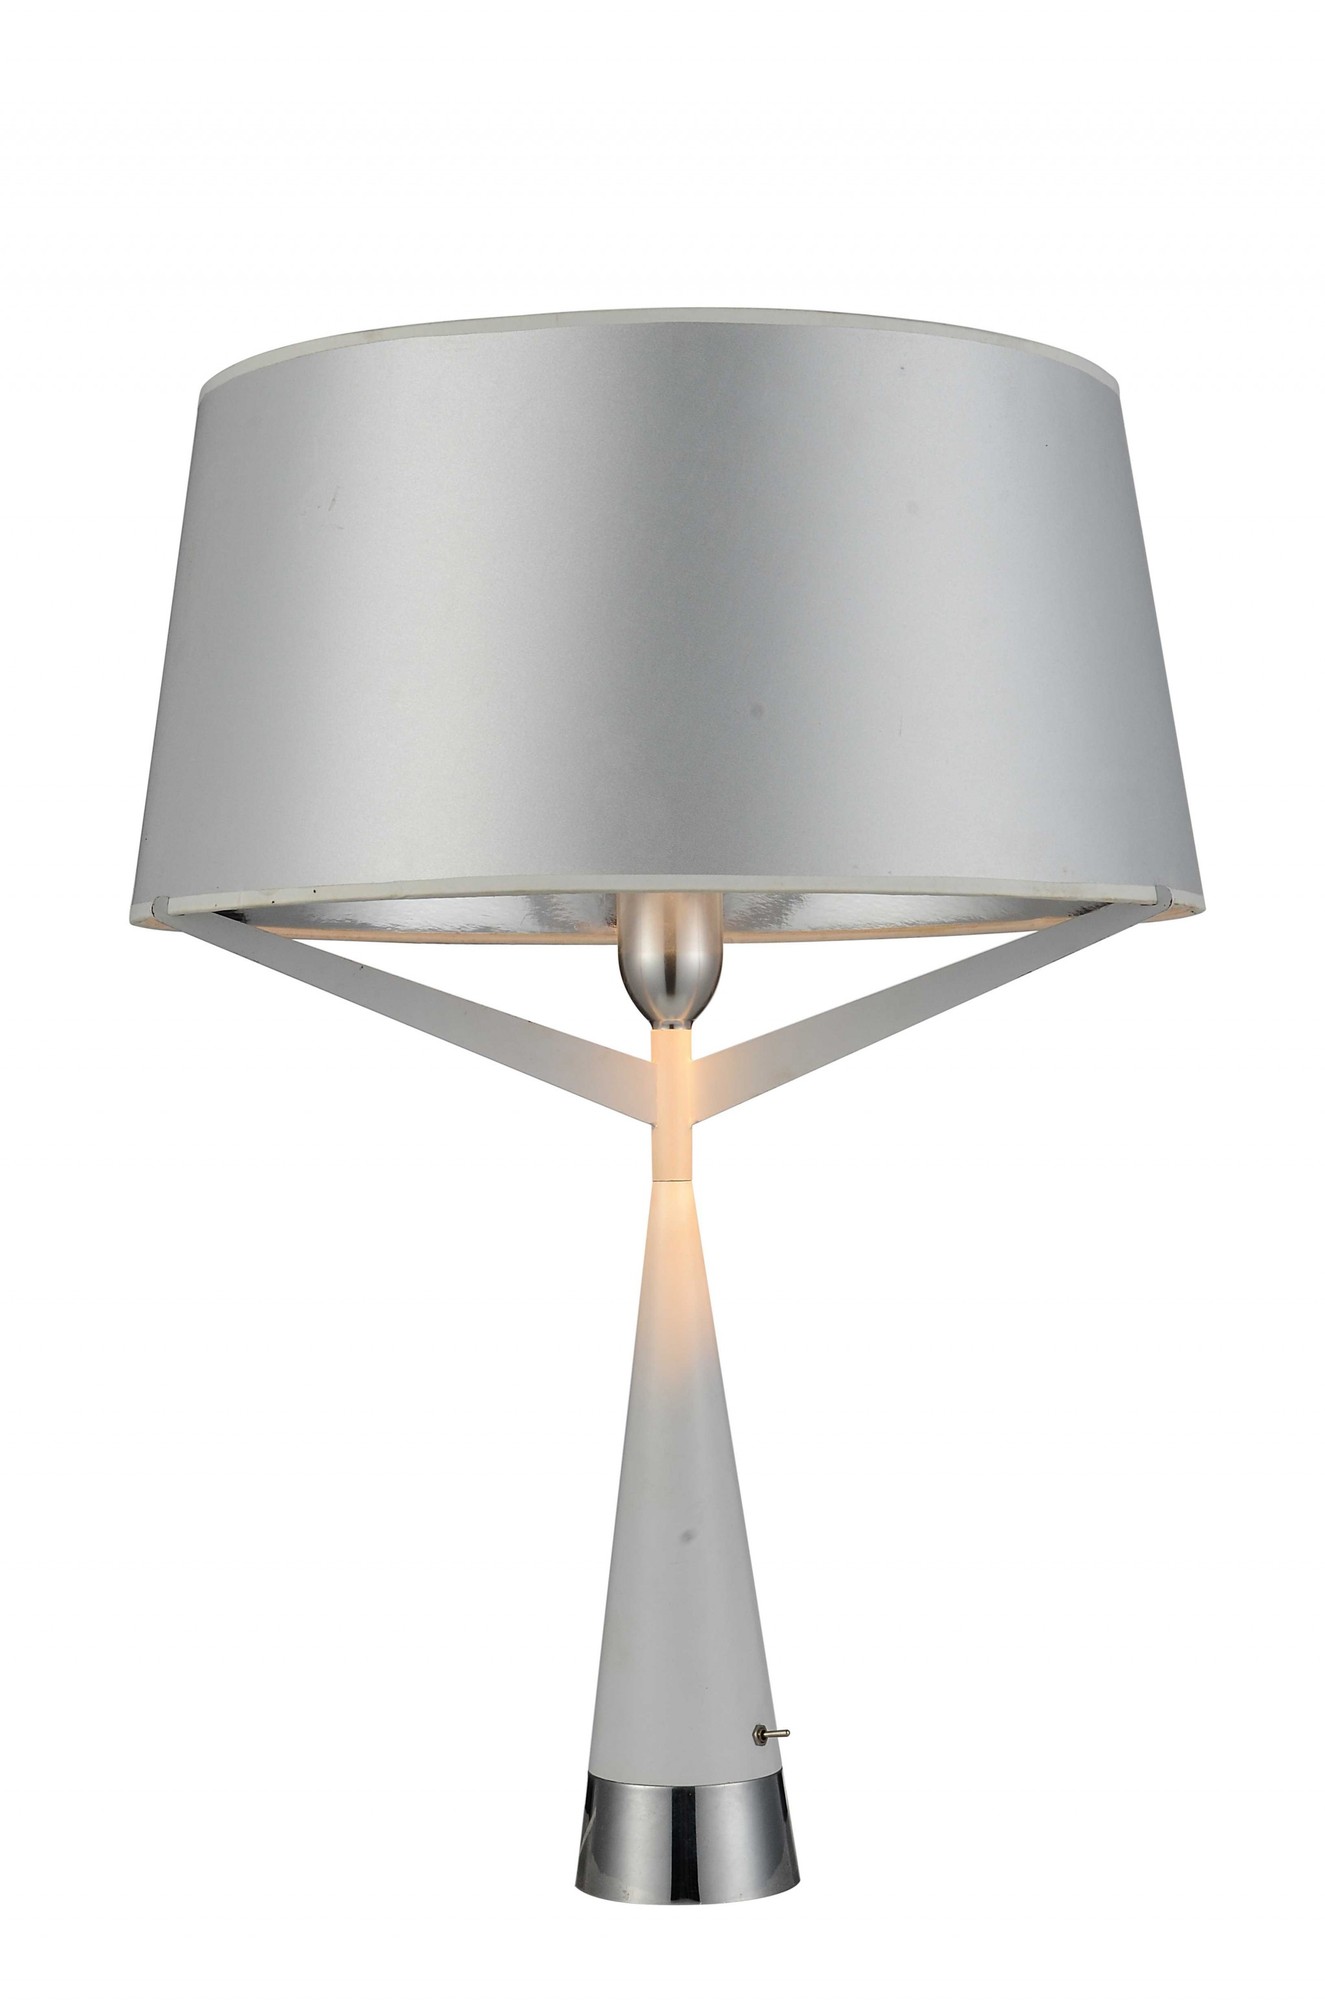 16" X 16" X 24" White Carbon Steel Table Lamp